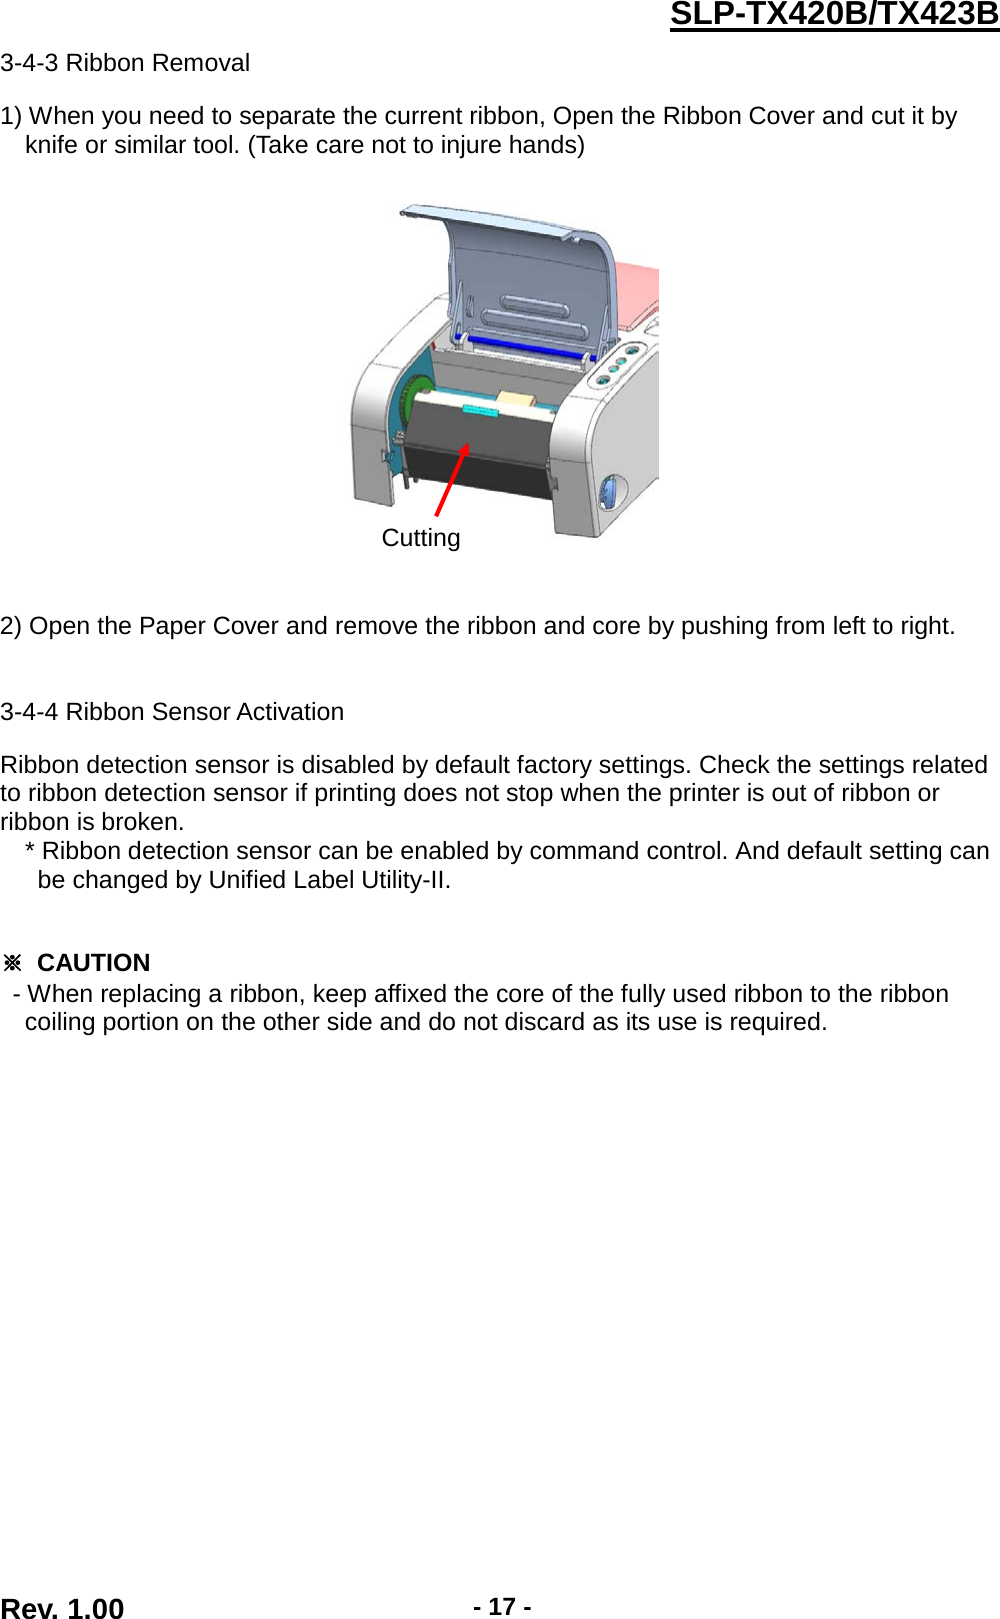  Rev. 1.00 - 17 - SLP-TX420B/TX423B 3-4-3 Ribbon Removal  1) When you need to separate the current ribbon, Open the Ribbon Cover and cut it by knife or similar tool. (Take care not to injure hands)     2) Open the Paper Cover and remove the ribbon and core by pushing from left to right.   3-4-4 Ribbon Sensor Activation  Ribbon detection sensor is disabled by default factory settings. Check the settings related to ribbon detection sensor if printing does not stop when the printer is out of ribbon or ribbon is broken. * Ribbon detection sensor can be enabled by command control. And default setting can   be changed by Unified Label Utility-II.   ※ CAUTION - When replacing a ribbon, keep affixed the core of the fully used ribbon to the ribbon   coiling portion on the other side and do not discard as its use is required. Cutting 